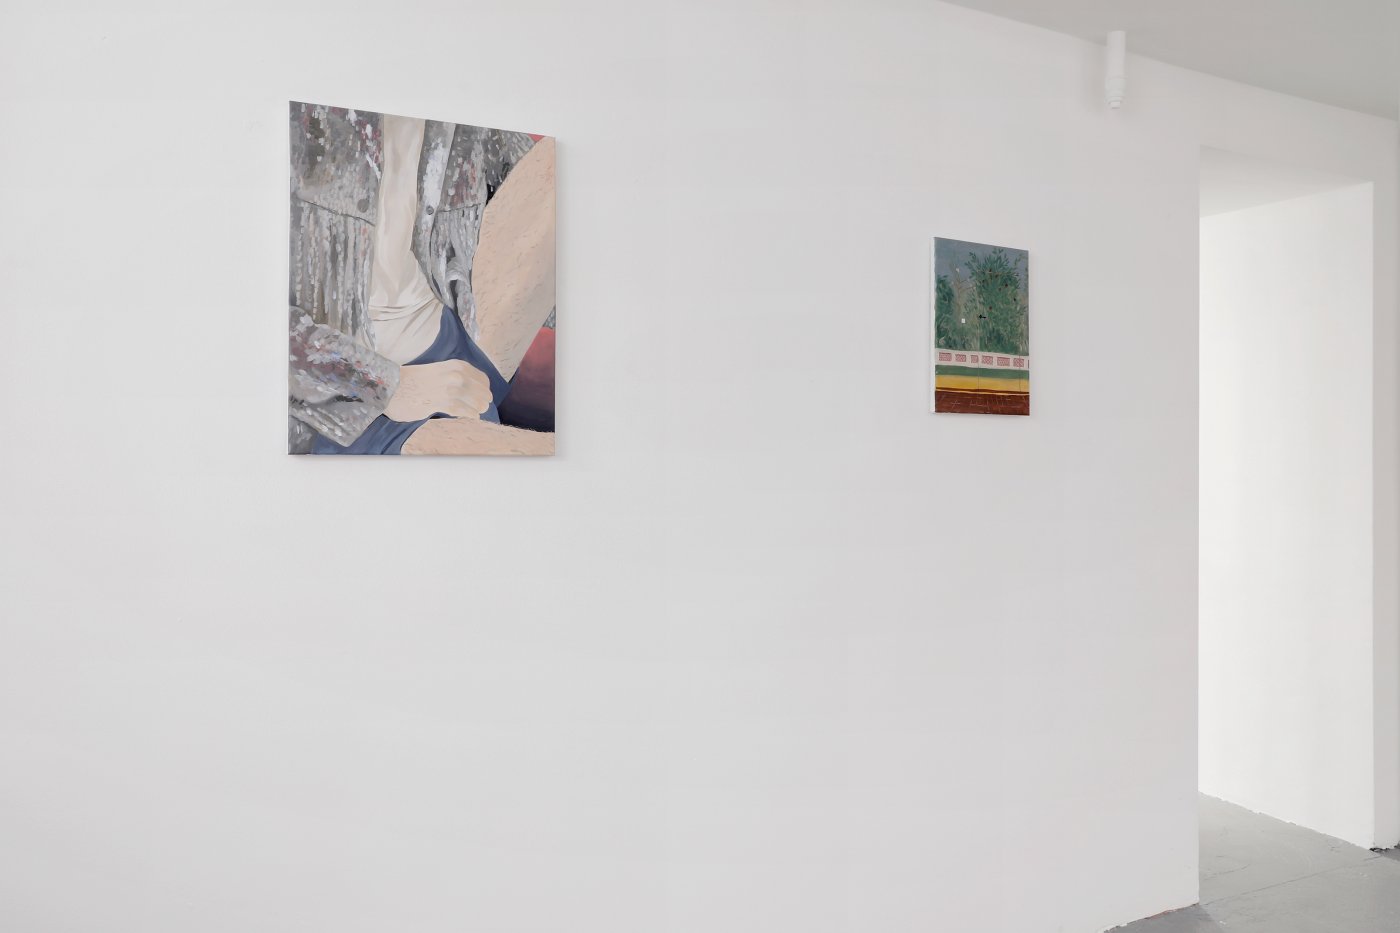 Installation image for Romane De Watteville: Every Me, at Fabienne Levy